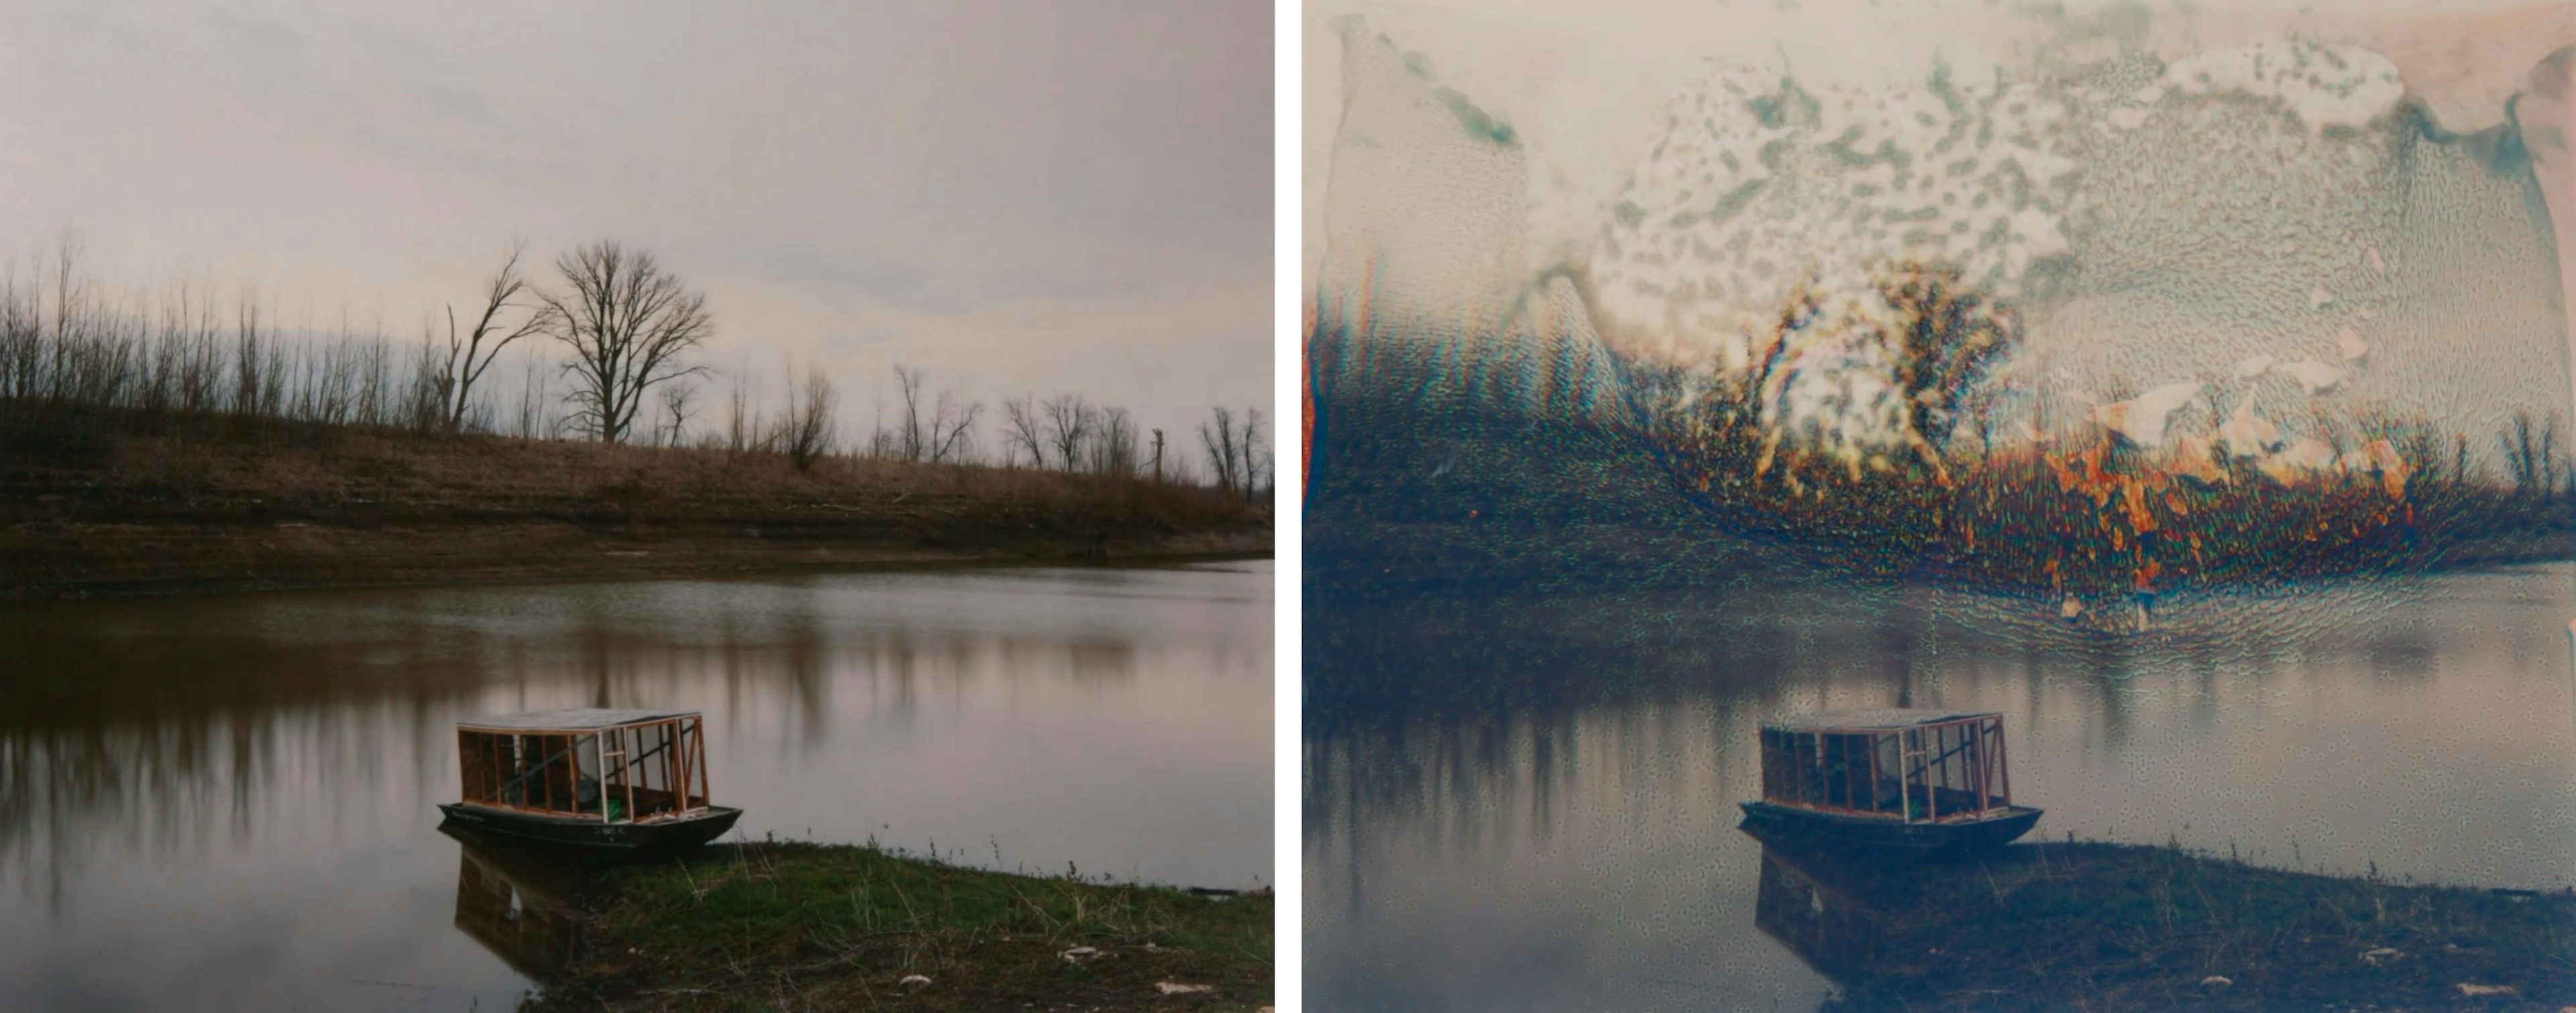 Video stills from #12 Saint Genevieve, Missouri by Alec Soth from Dissolutions (Sleeping by the Mississippi), Obscura Curated Commission